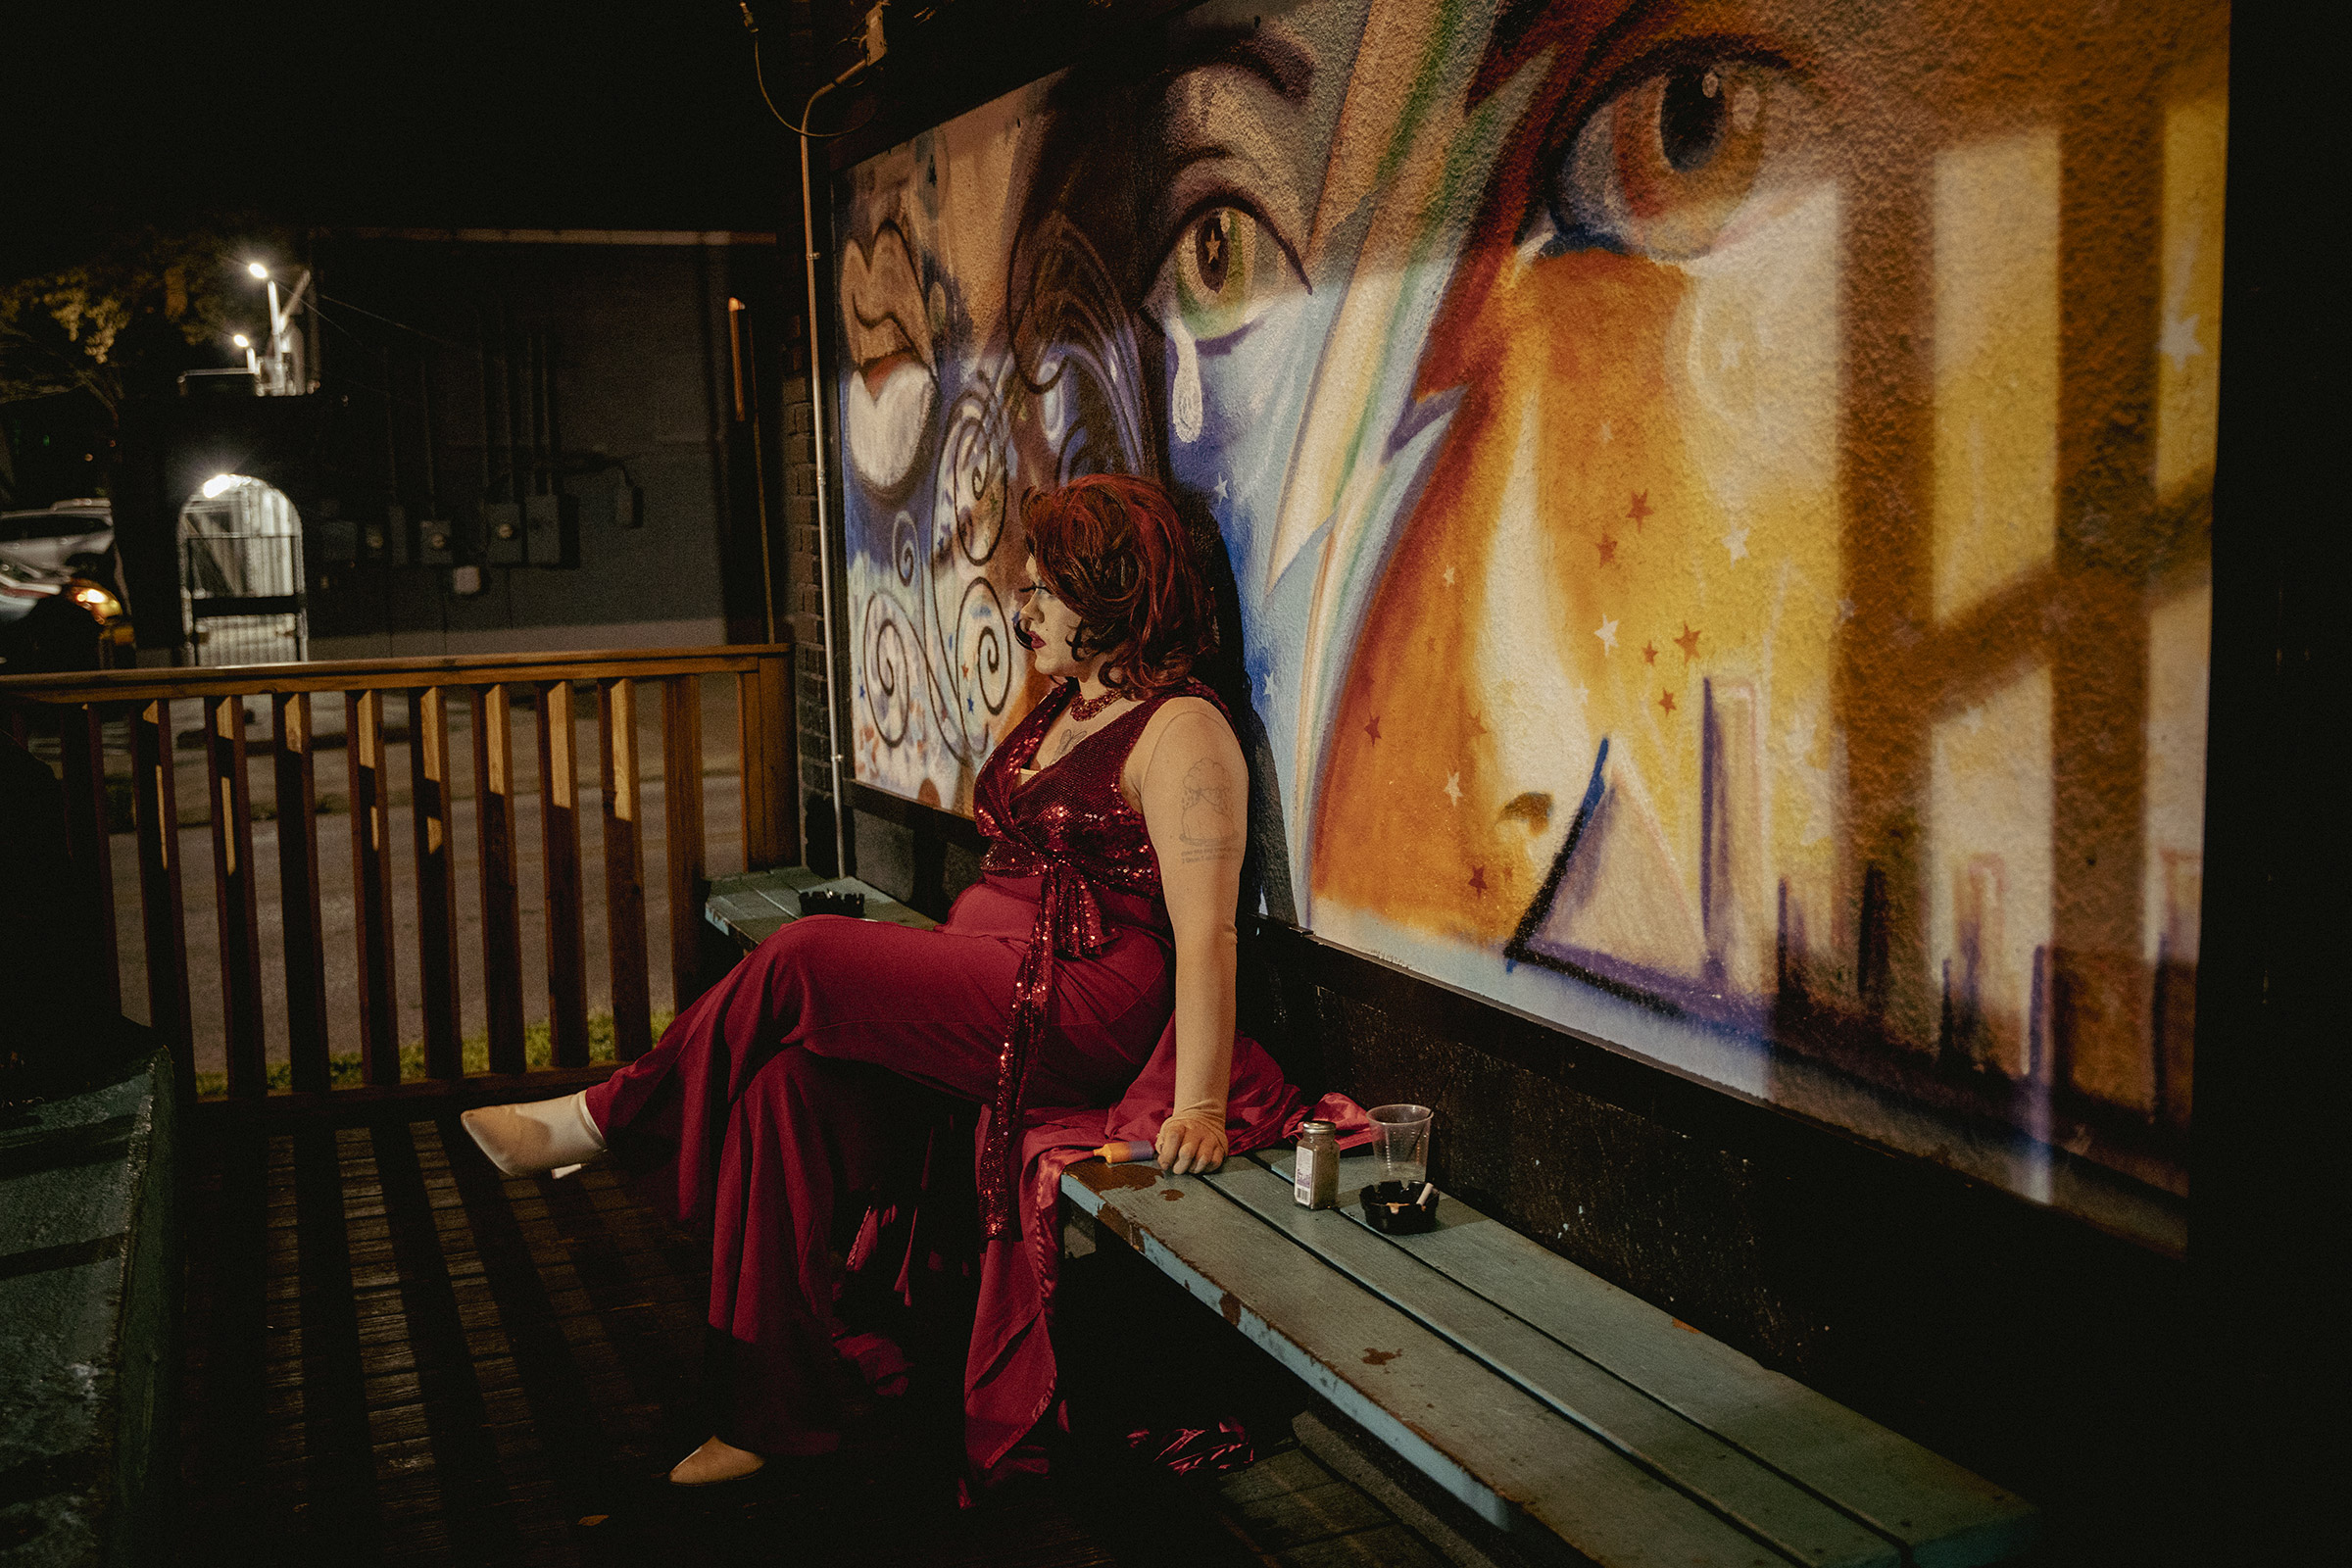 Tiffany Minxx, a drag performer in Memphis, sits on the back porch of Dru’s while taking a break from Sapphic Sunday. (Andrea Morales for TIME)